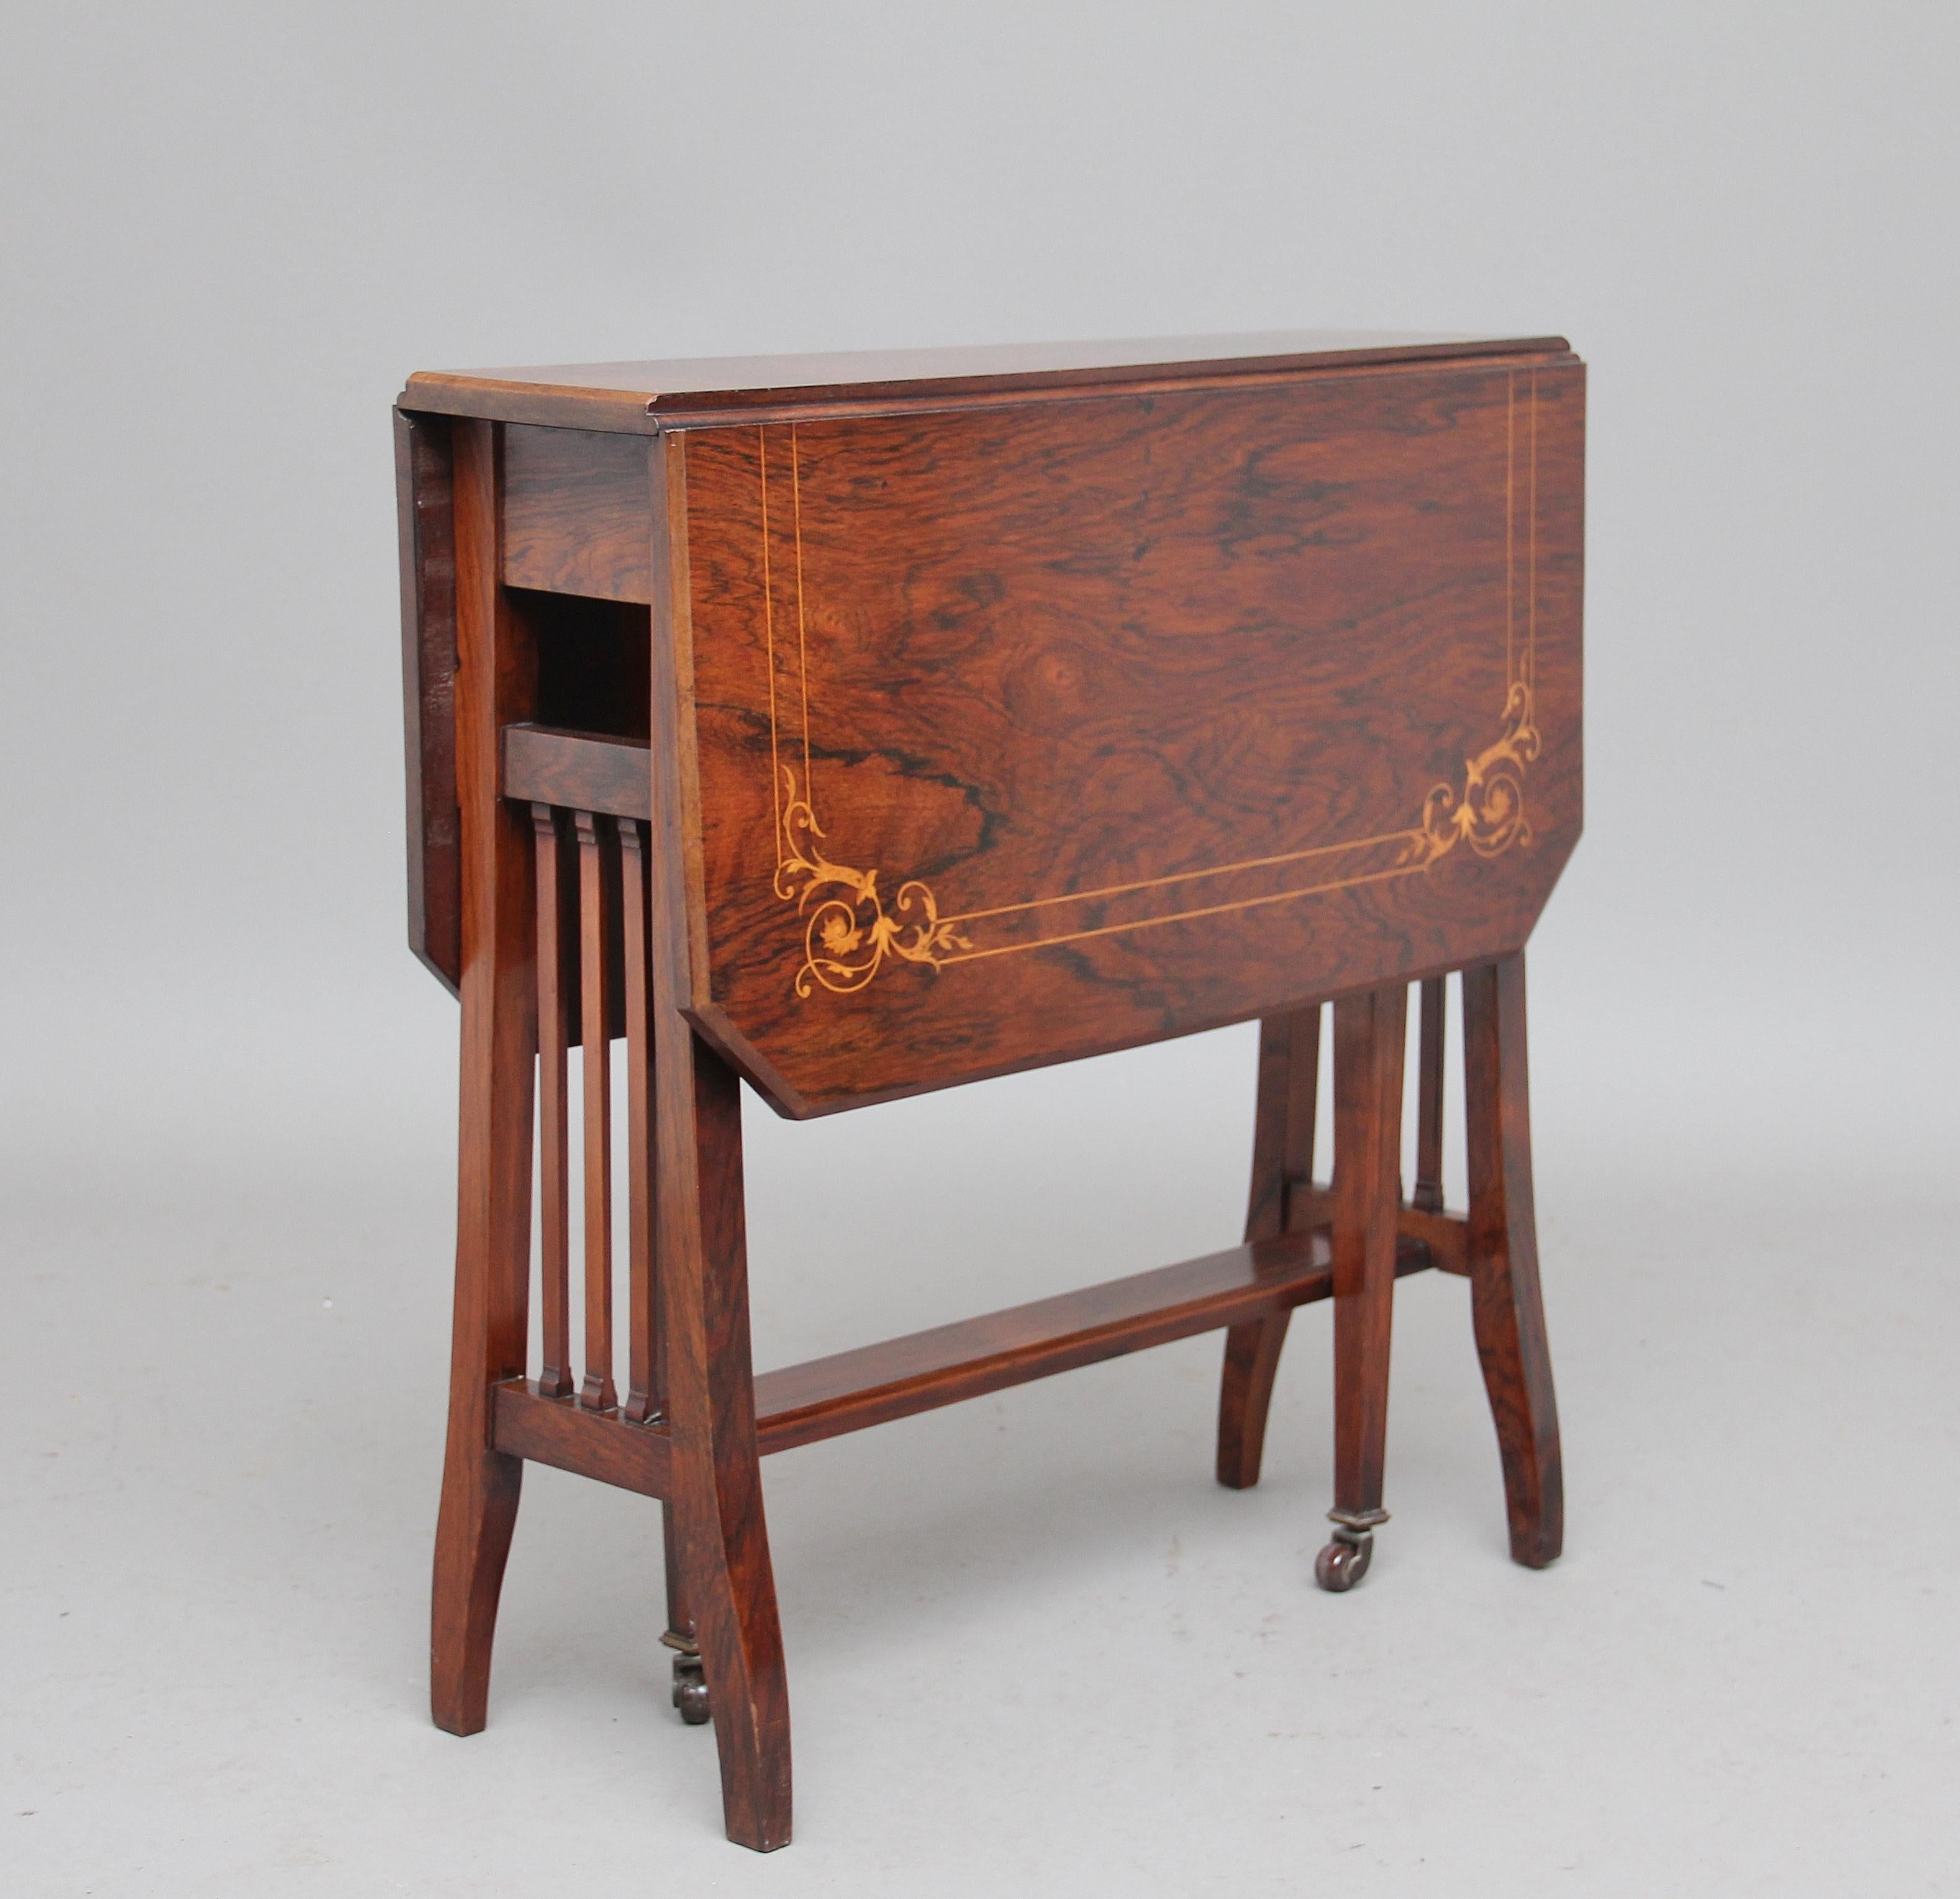 Late 19th Century rosewood Sutherland table, the drop leaf top having fine floral inlay decoration, shaped end supports united with a central stretcher, with two pull out square tapering legs terminating on brass caps and castors which hold the drop